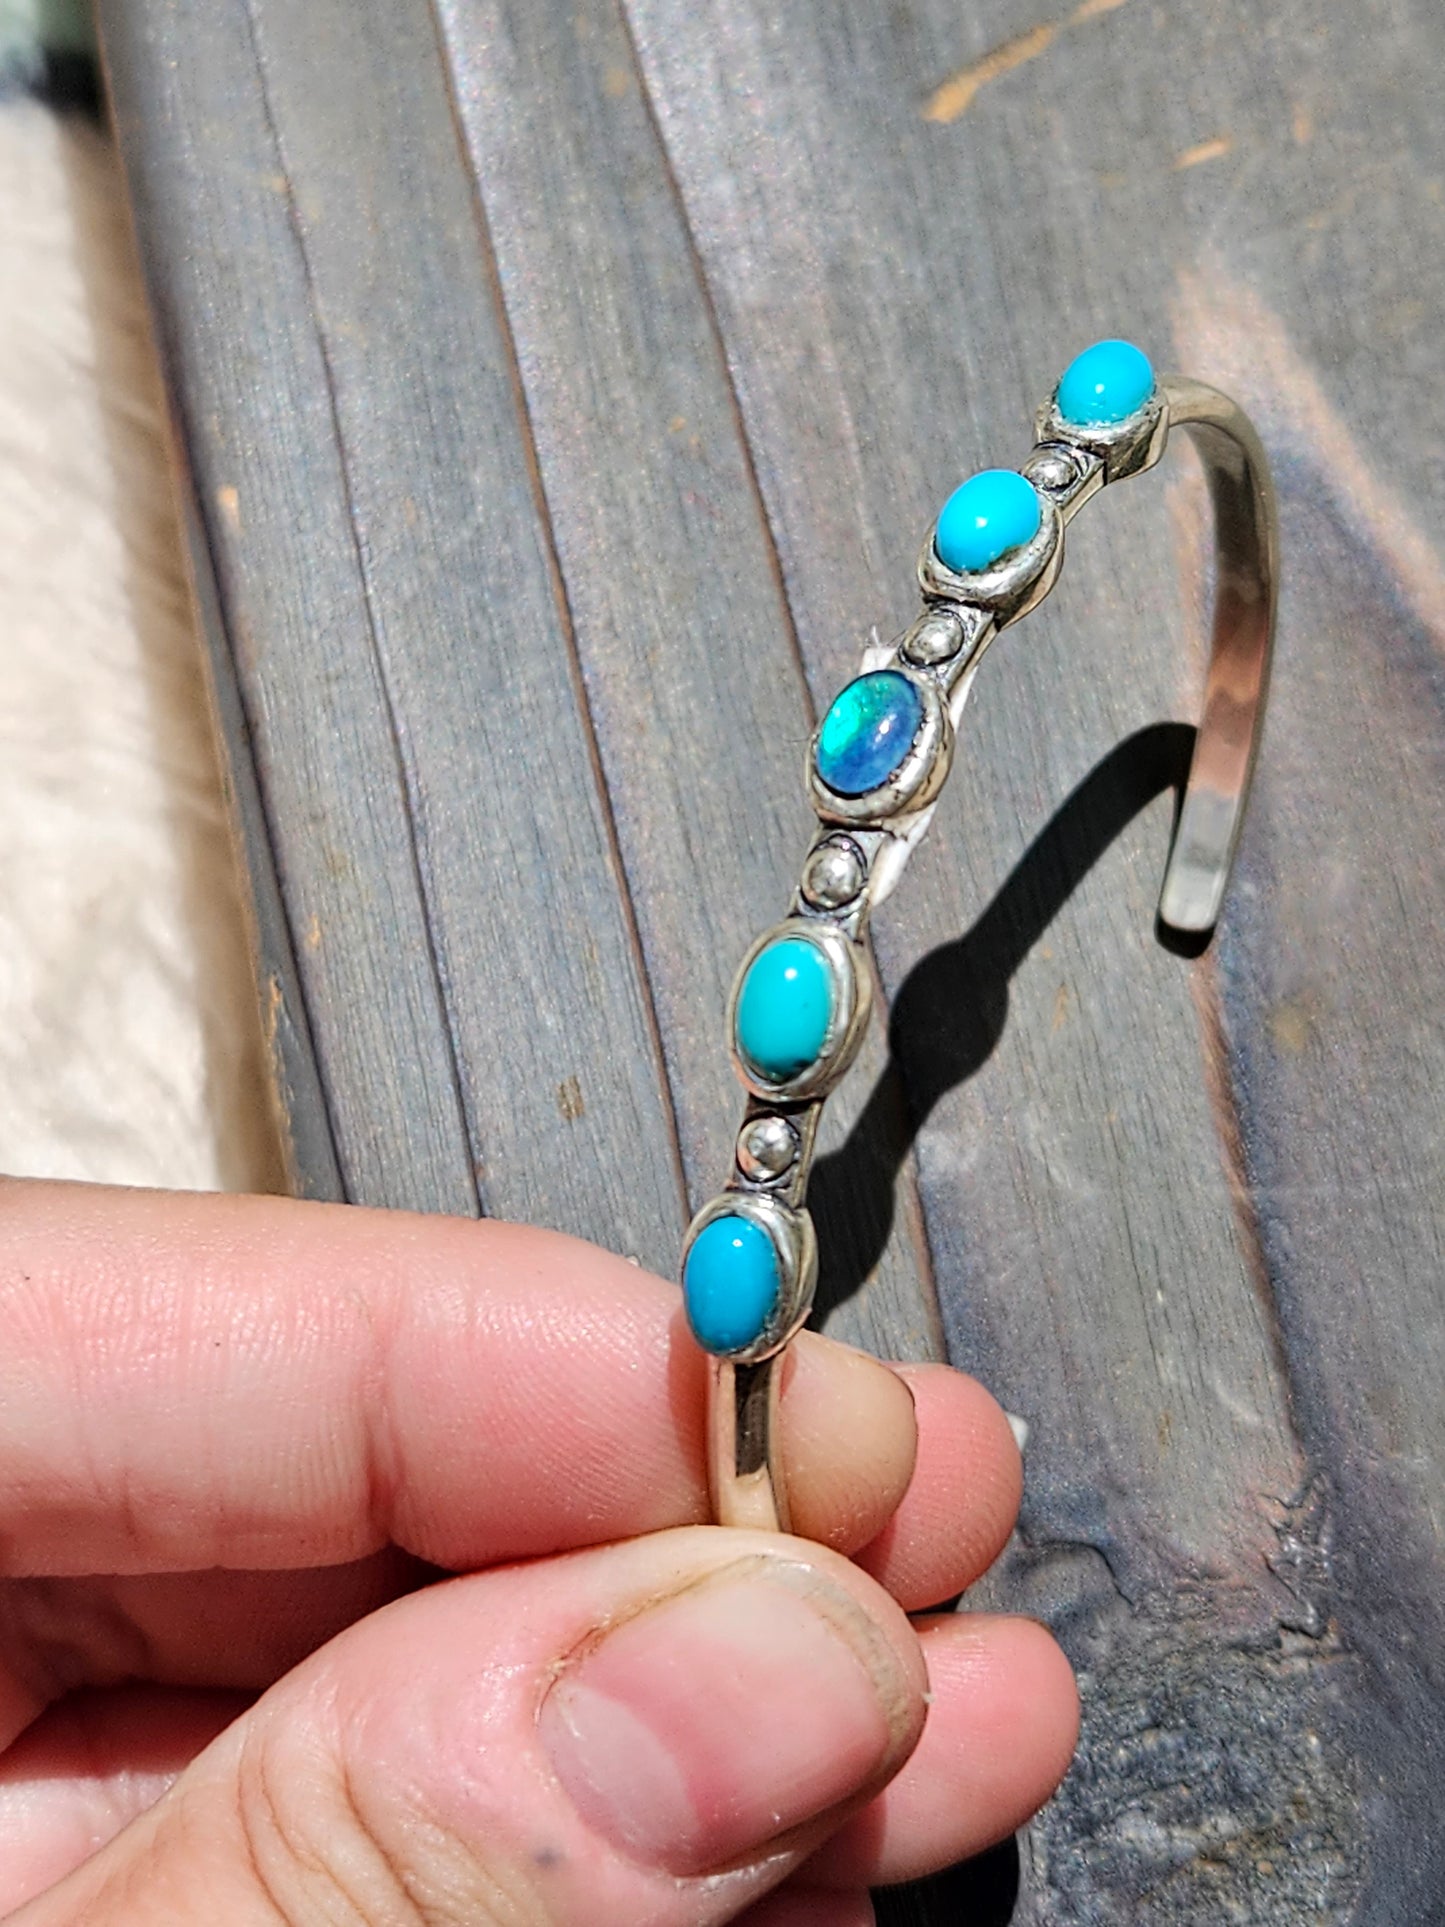 Black Opal and Turquoise Cuff Bracelet